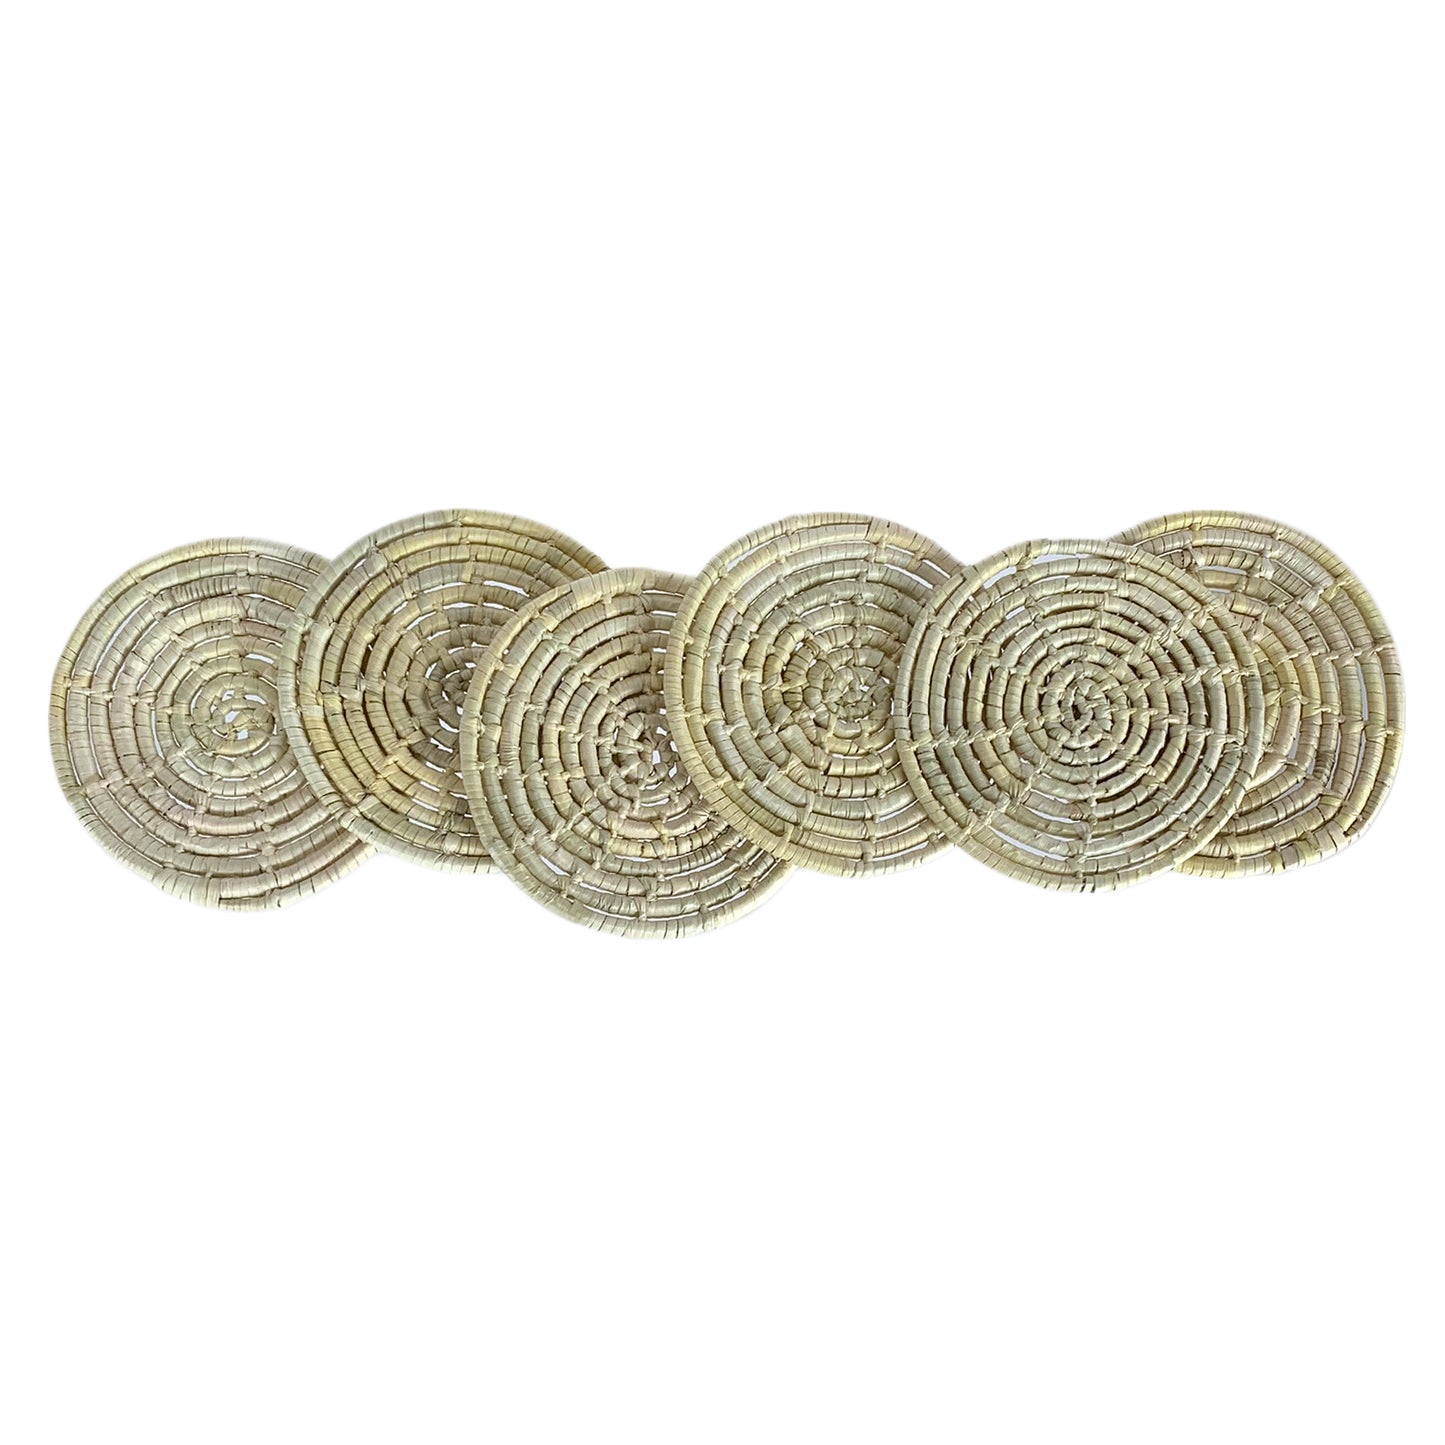 Hand-woven Palm Fiber coasters from Mexico (Sold Individually)